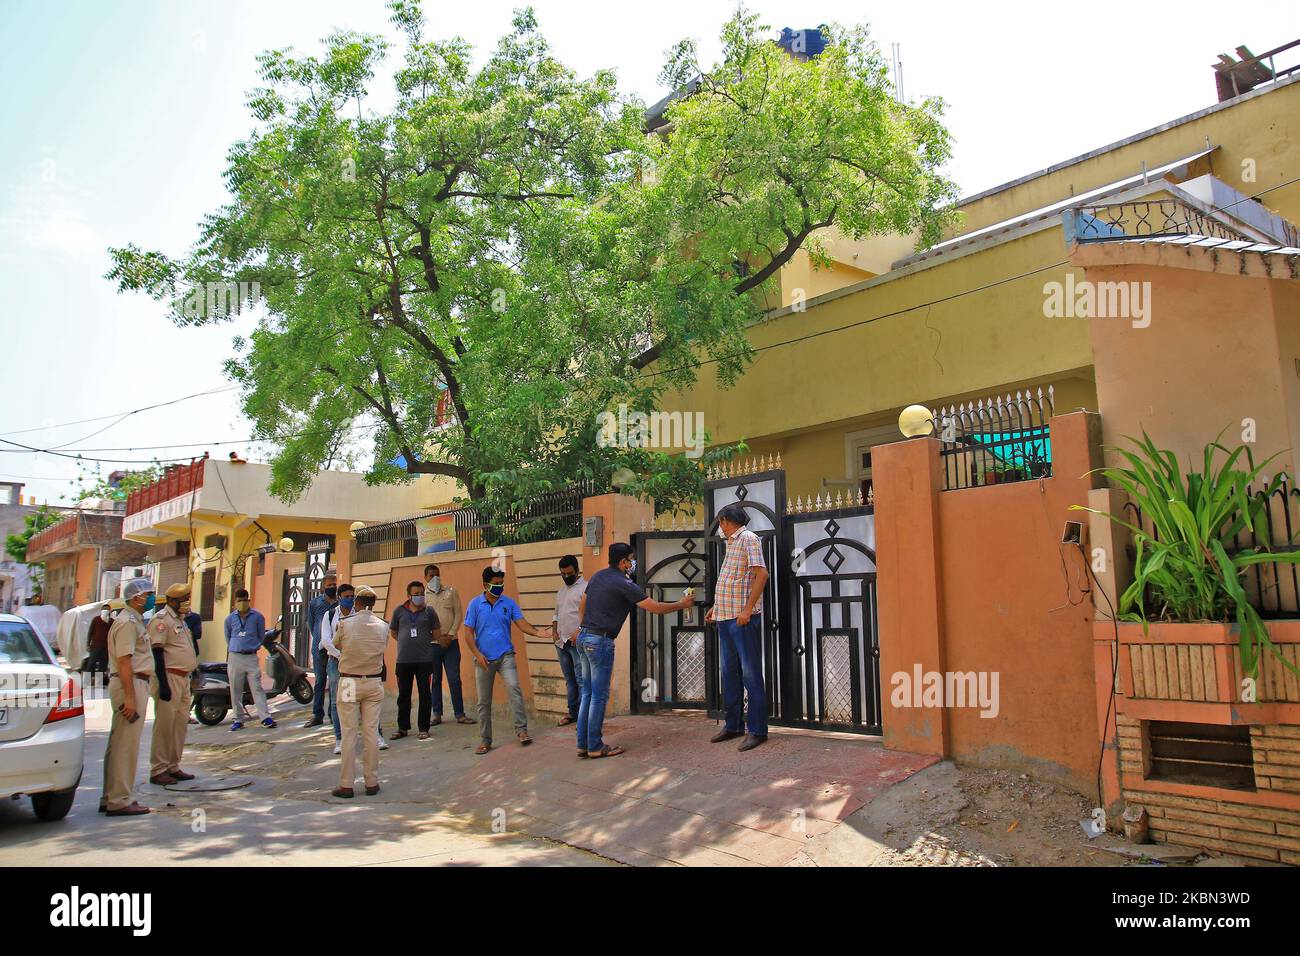 People are seen outside the house of Bollywood actor Irrfan Khan following the news of his death at Mumbai's Kolikilaben Dhirubhai Ambani Hospial, in Jaipur, Rajasthan, India. April 29,2020. Irrfan Khan , one of the India's finest and versatile actors, lost his battle with the rare form of cancer , died in a Mumbai hospital at the age of 54 . (Photo by Vishal Bhatnagar/NurPhoto) Stock Photo